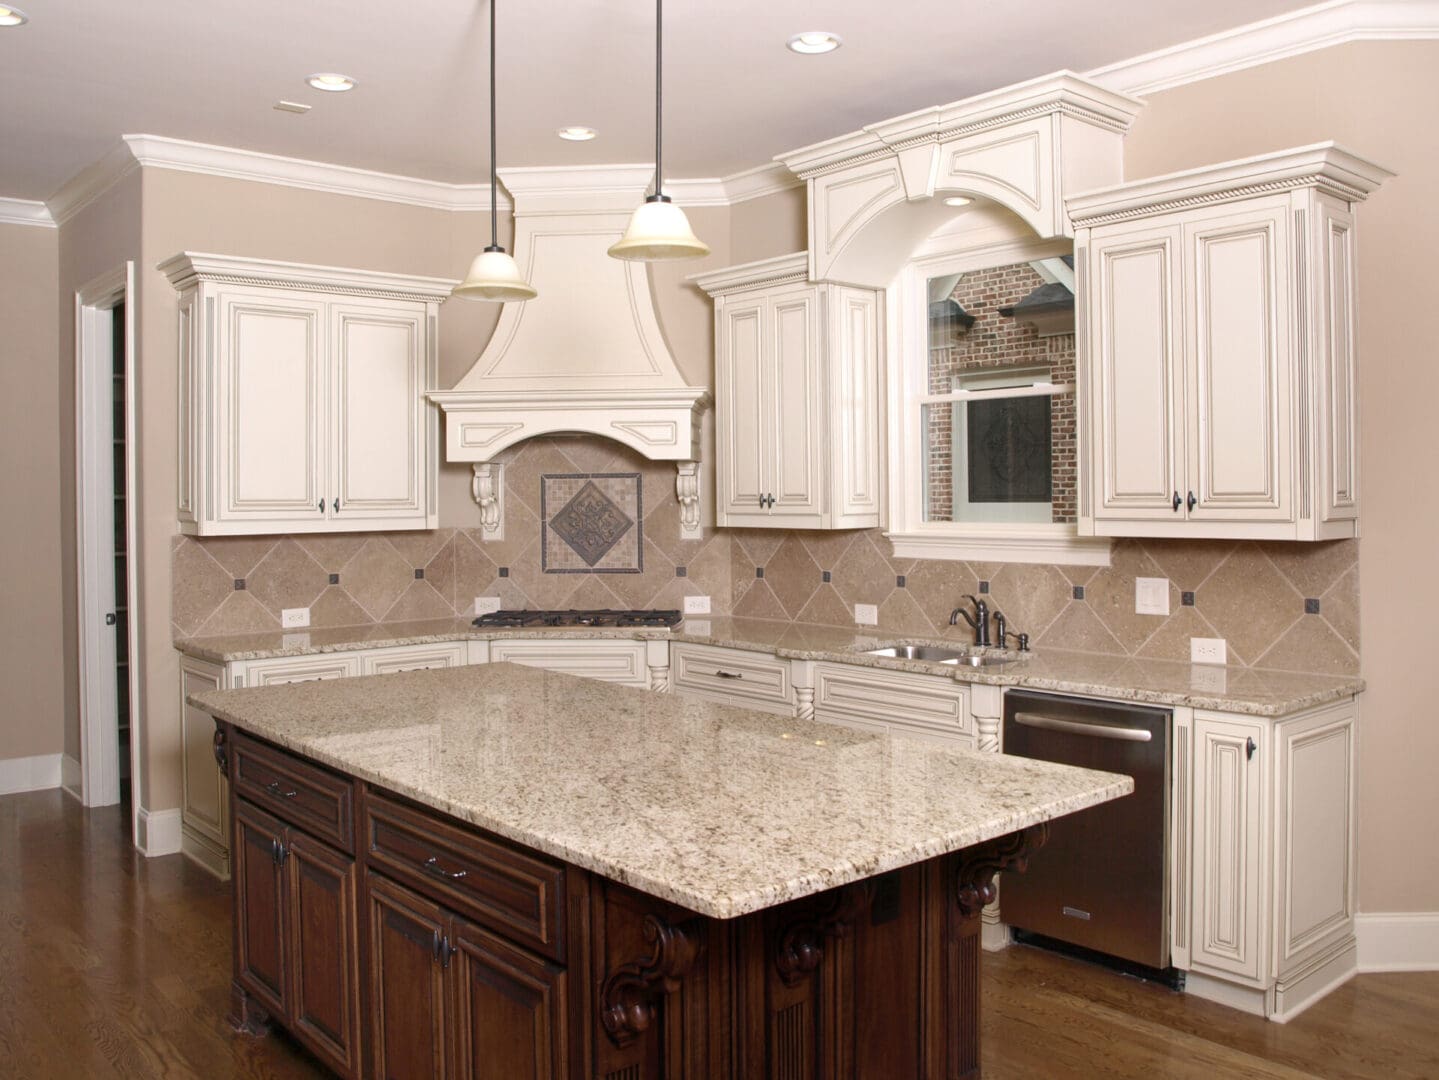 A kitchen with white cabinets and brown island.